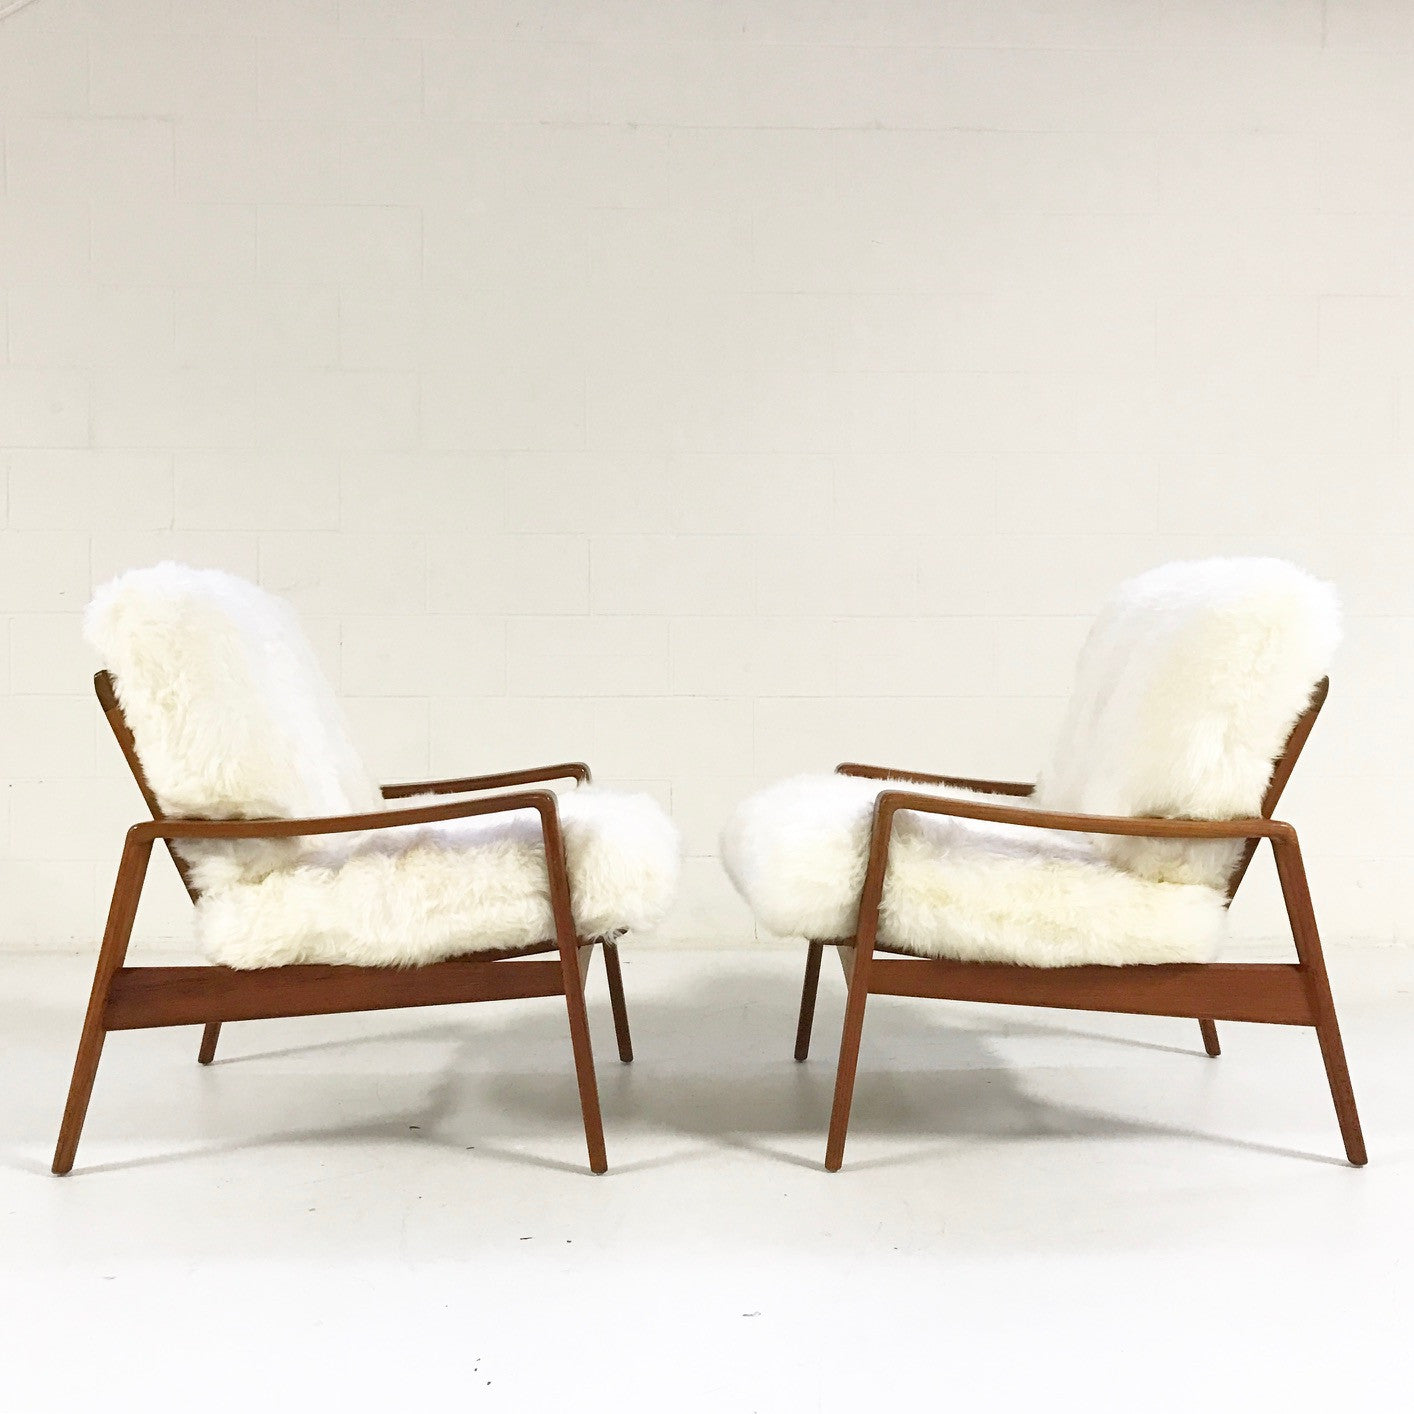 Lounge Chairs in New Zealand Sheepskin, pair - FORSYTH